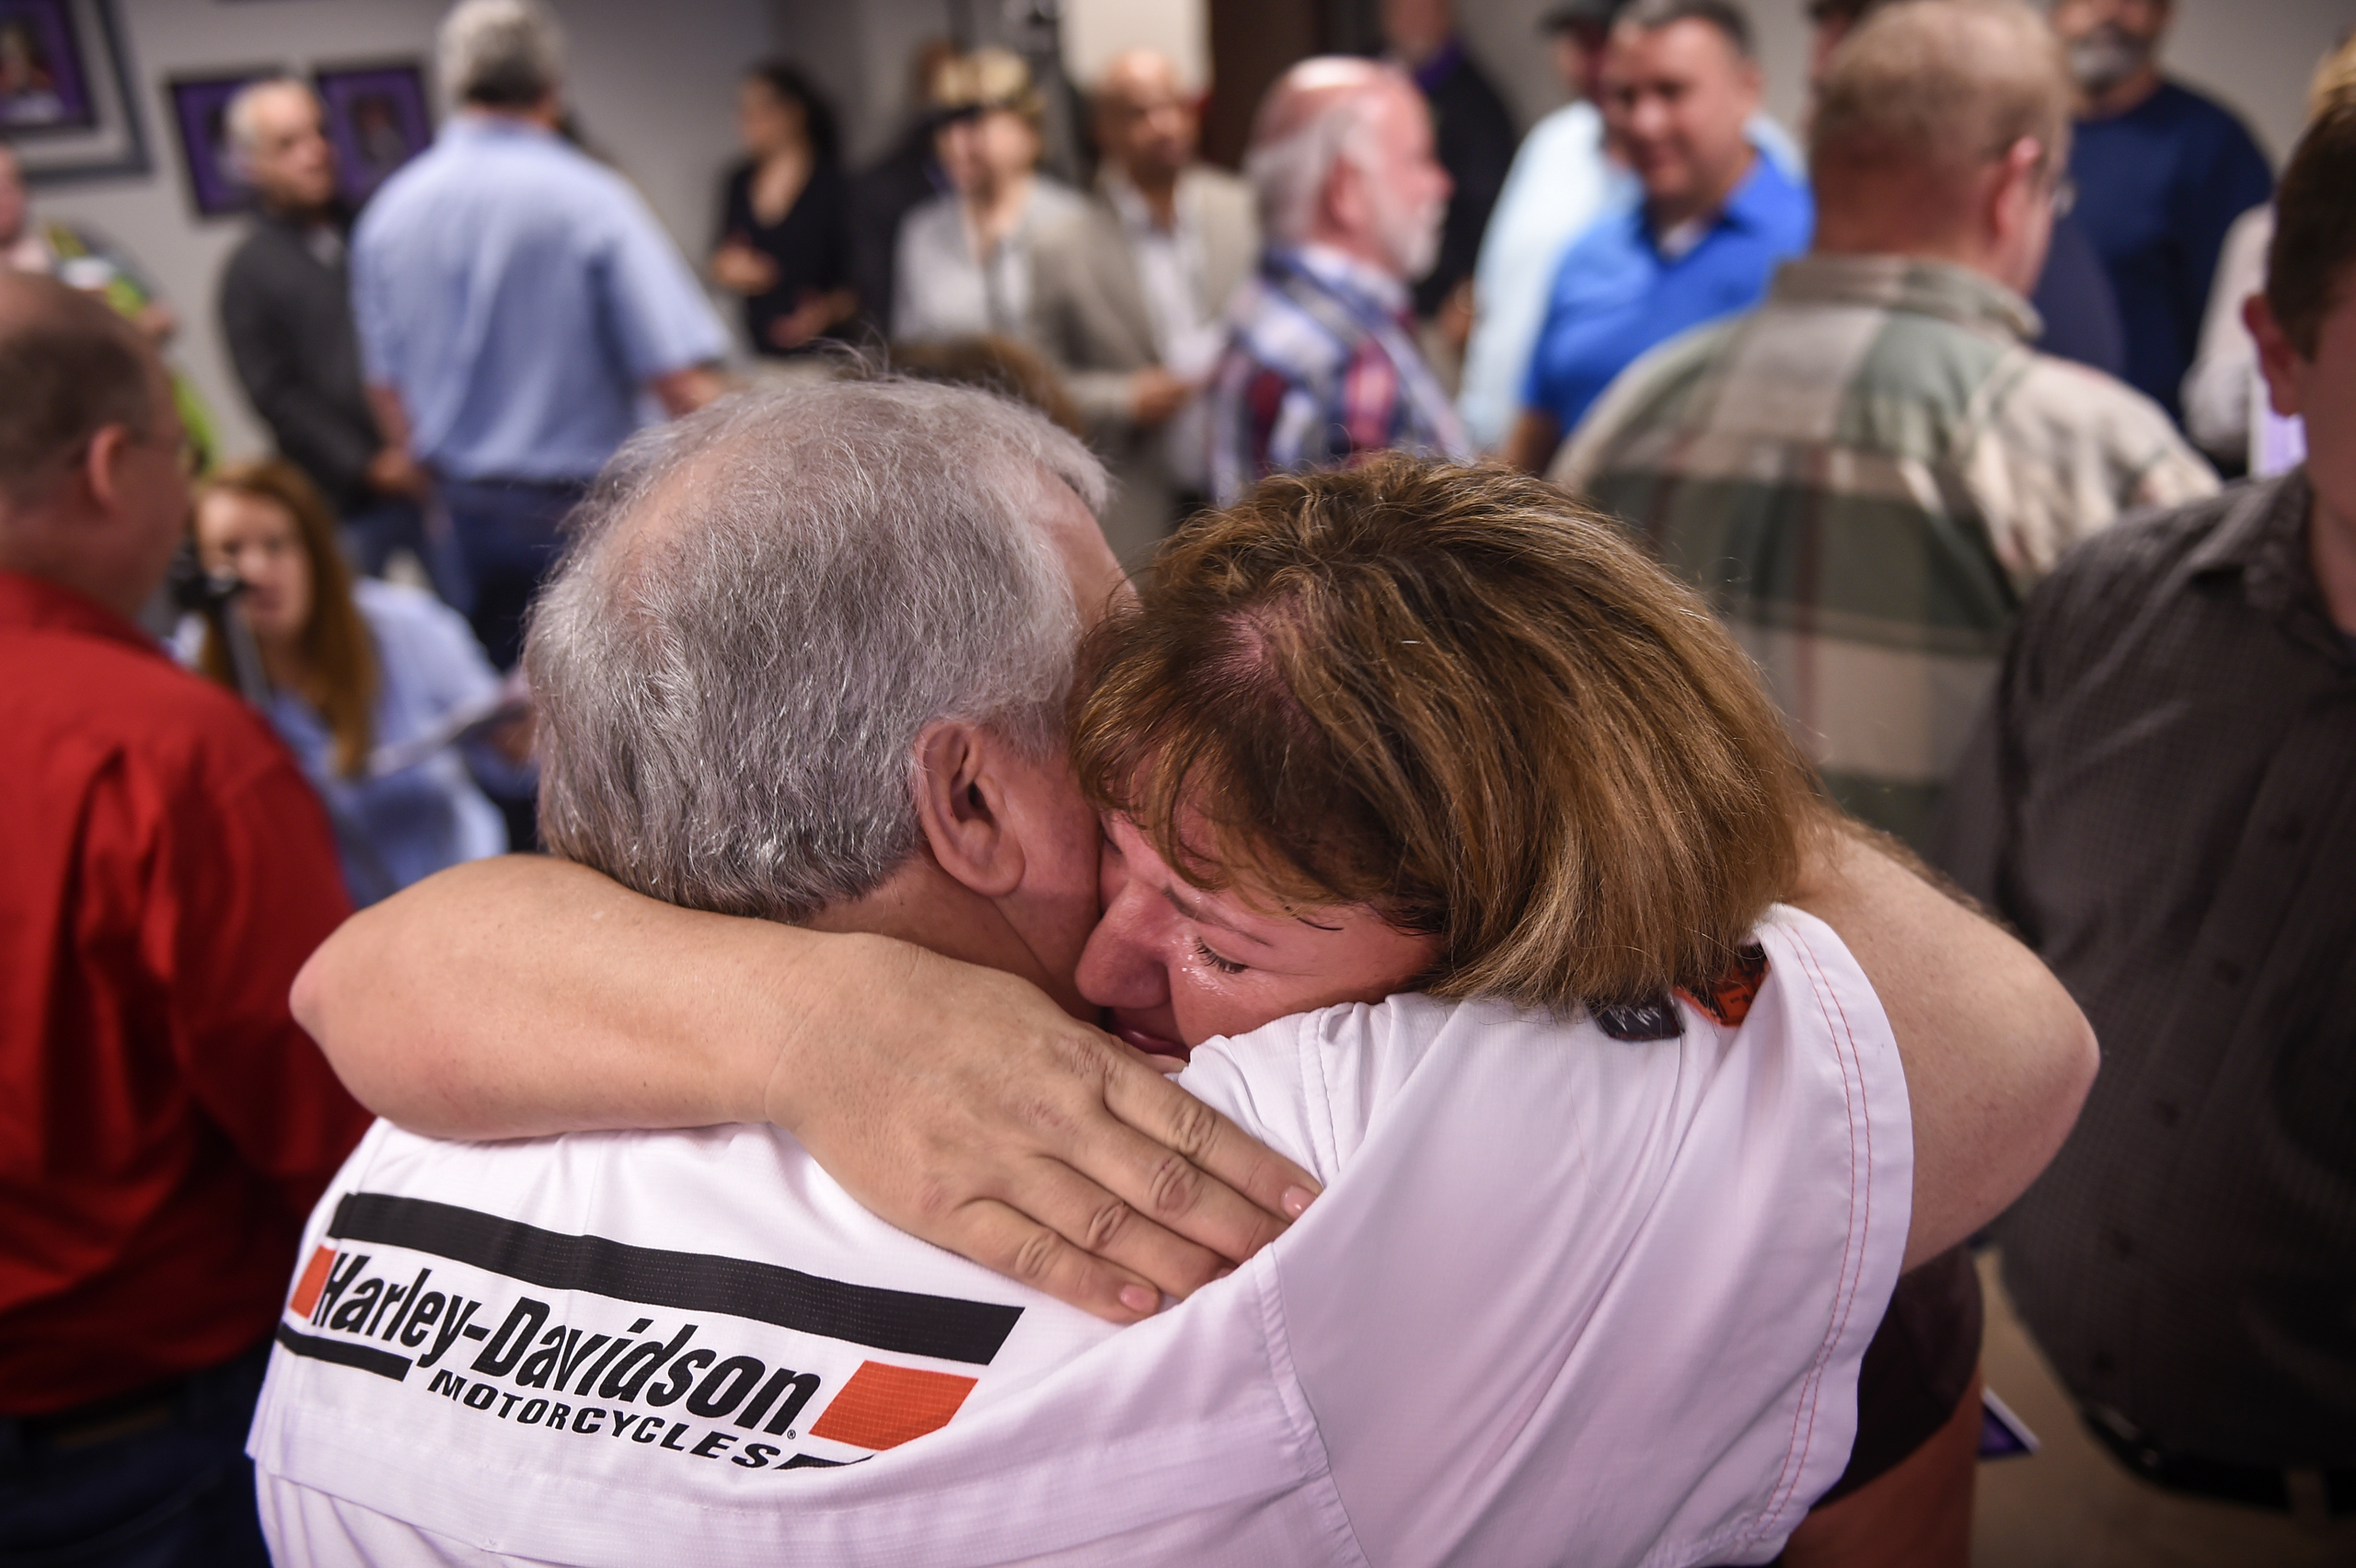 Amy O'Neal cries as she hugs co-worker and fellow lottery winner Larry Estes at the Tennessee Lottery Headquarters in Nashville, on Nov. 29, 2016. in Nashville. (Lacy Atkins—The Tennessean/AP)